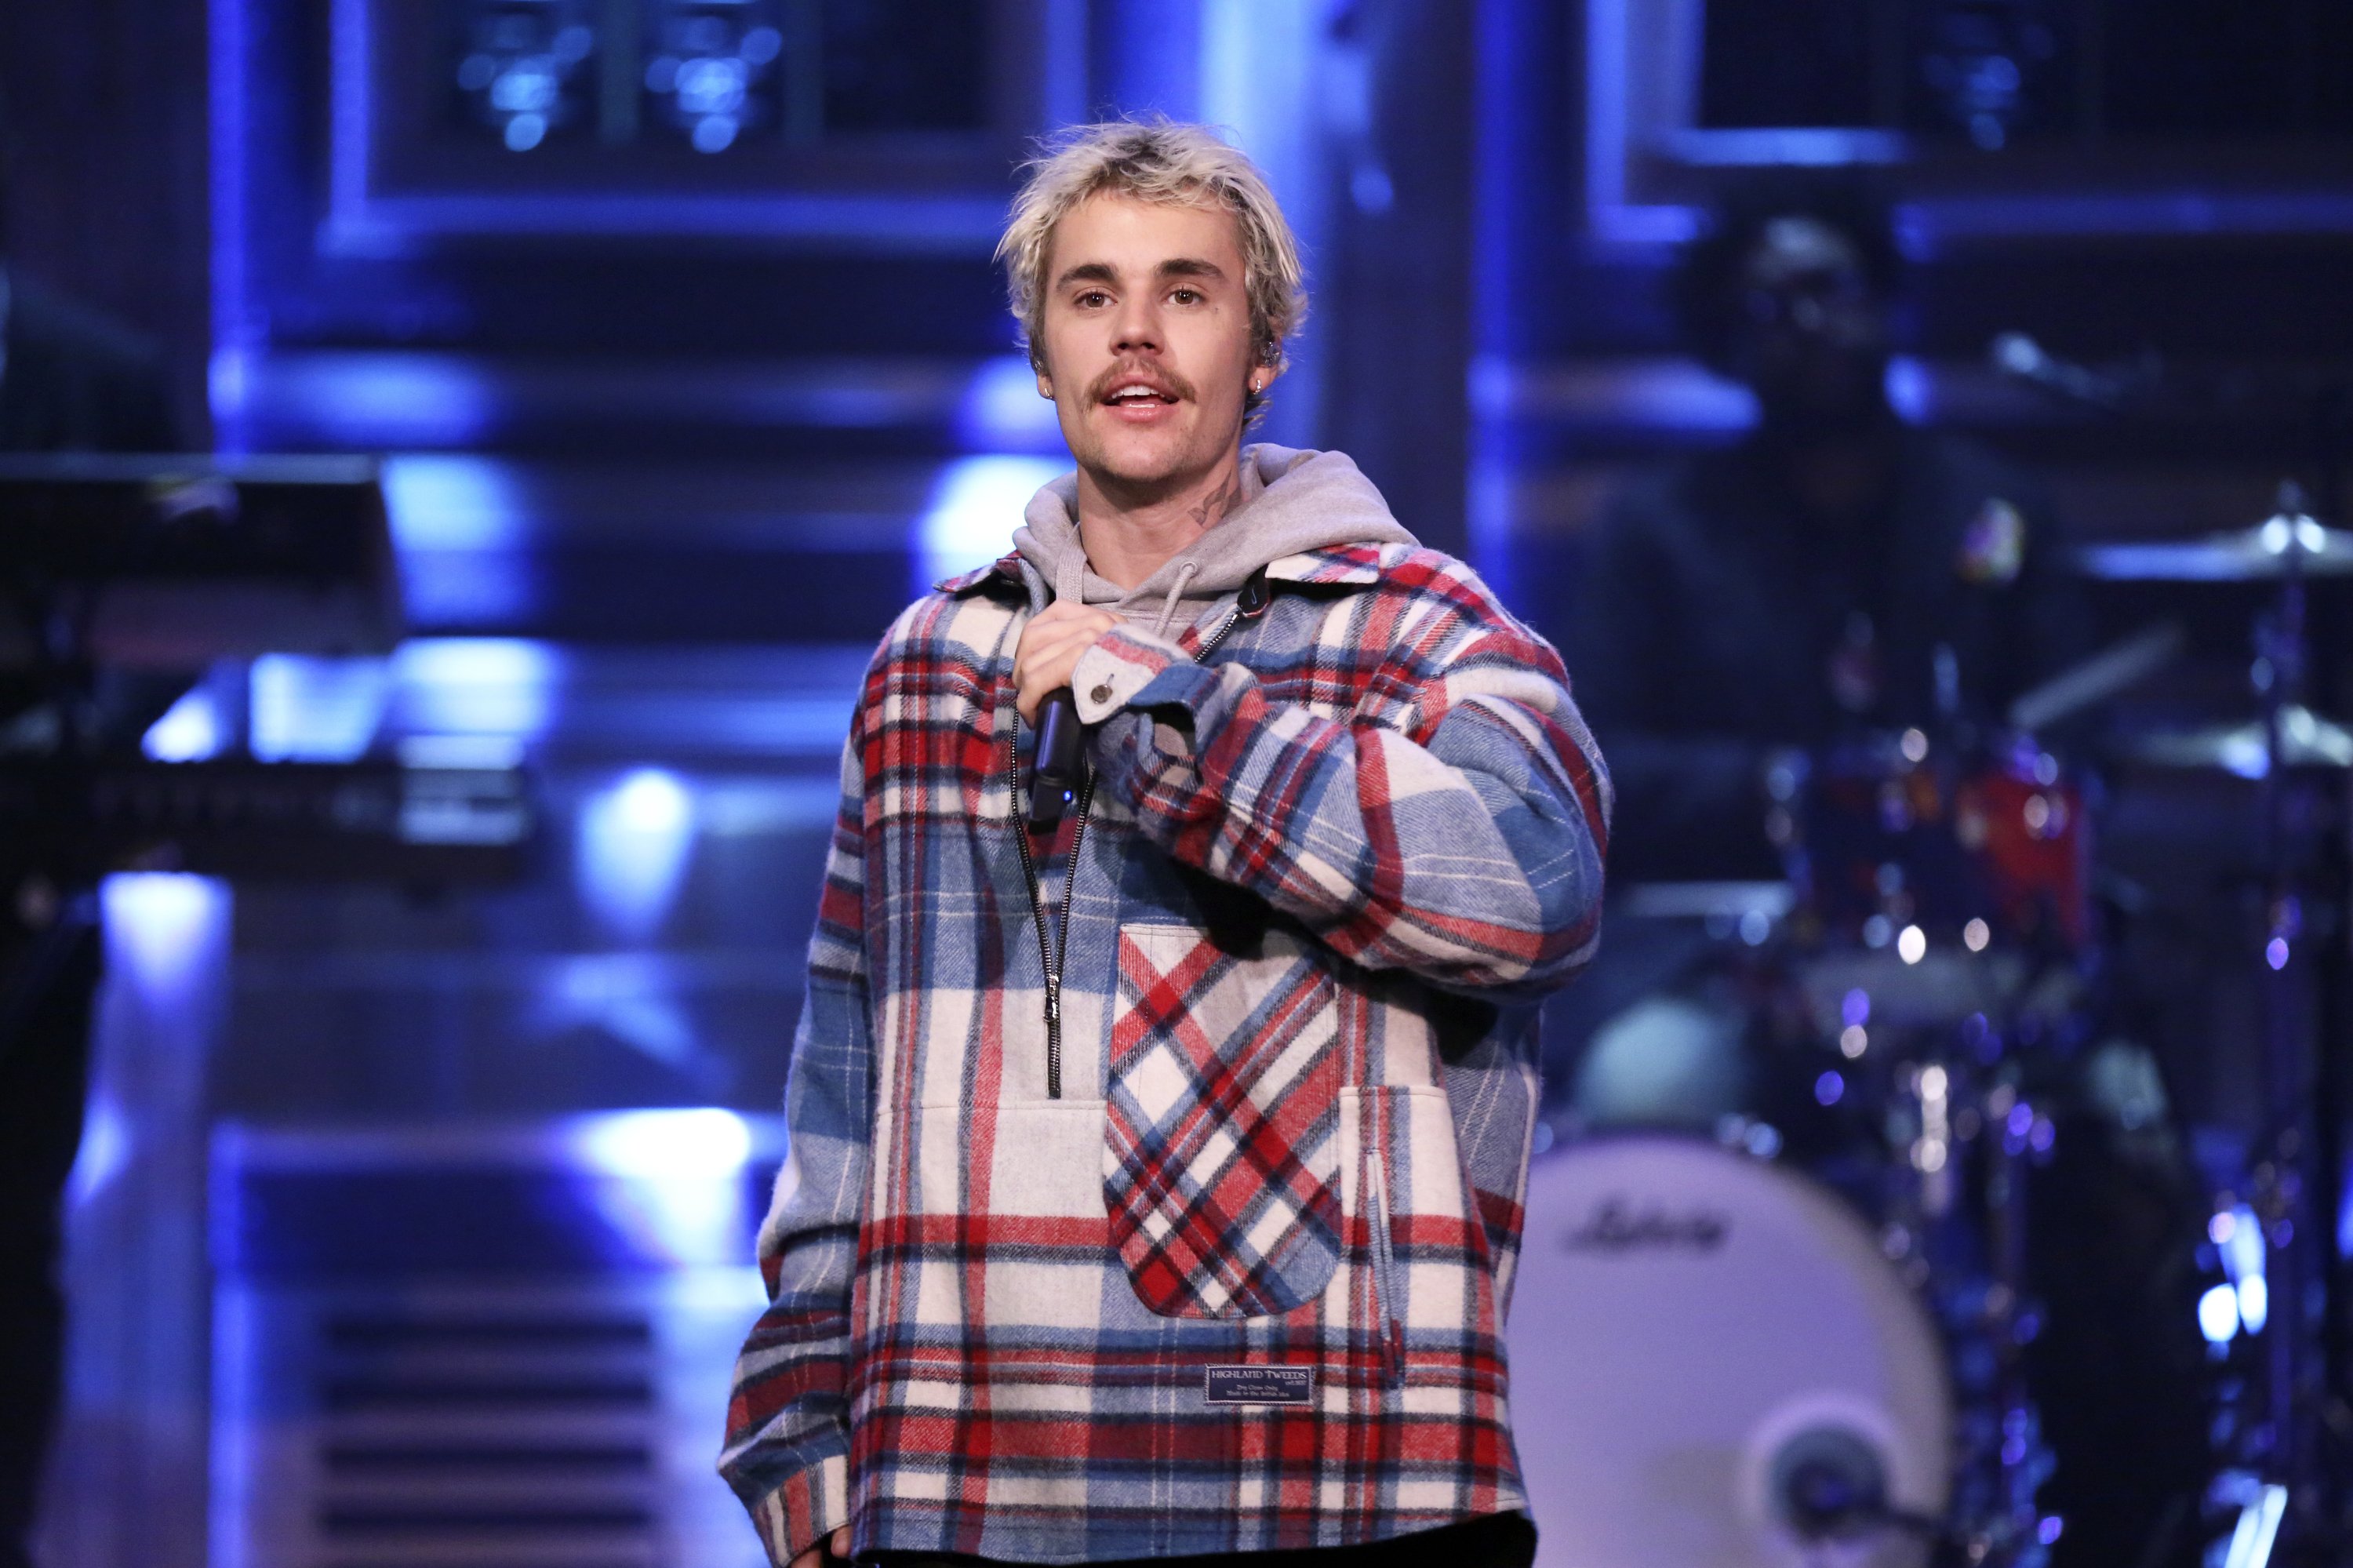 Justin Bieber performs on "The Tonight Show Starring Jimmy Fallon" on February 14, 2020. | Source: Getty Images